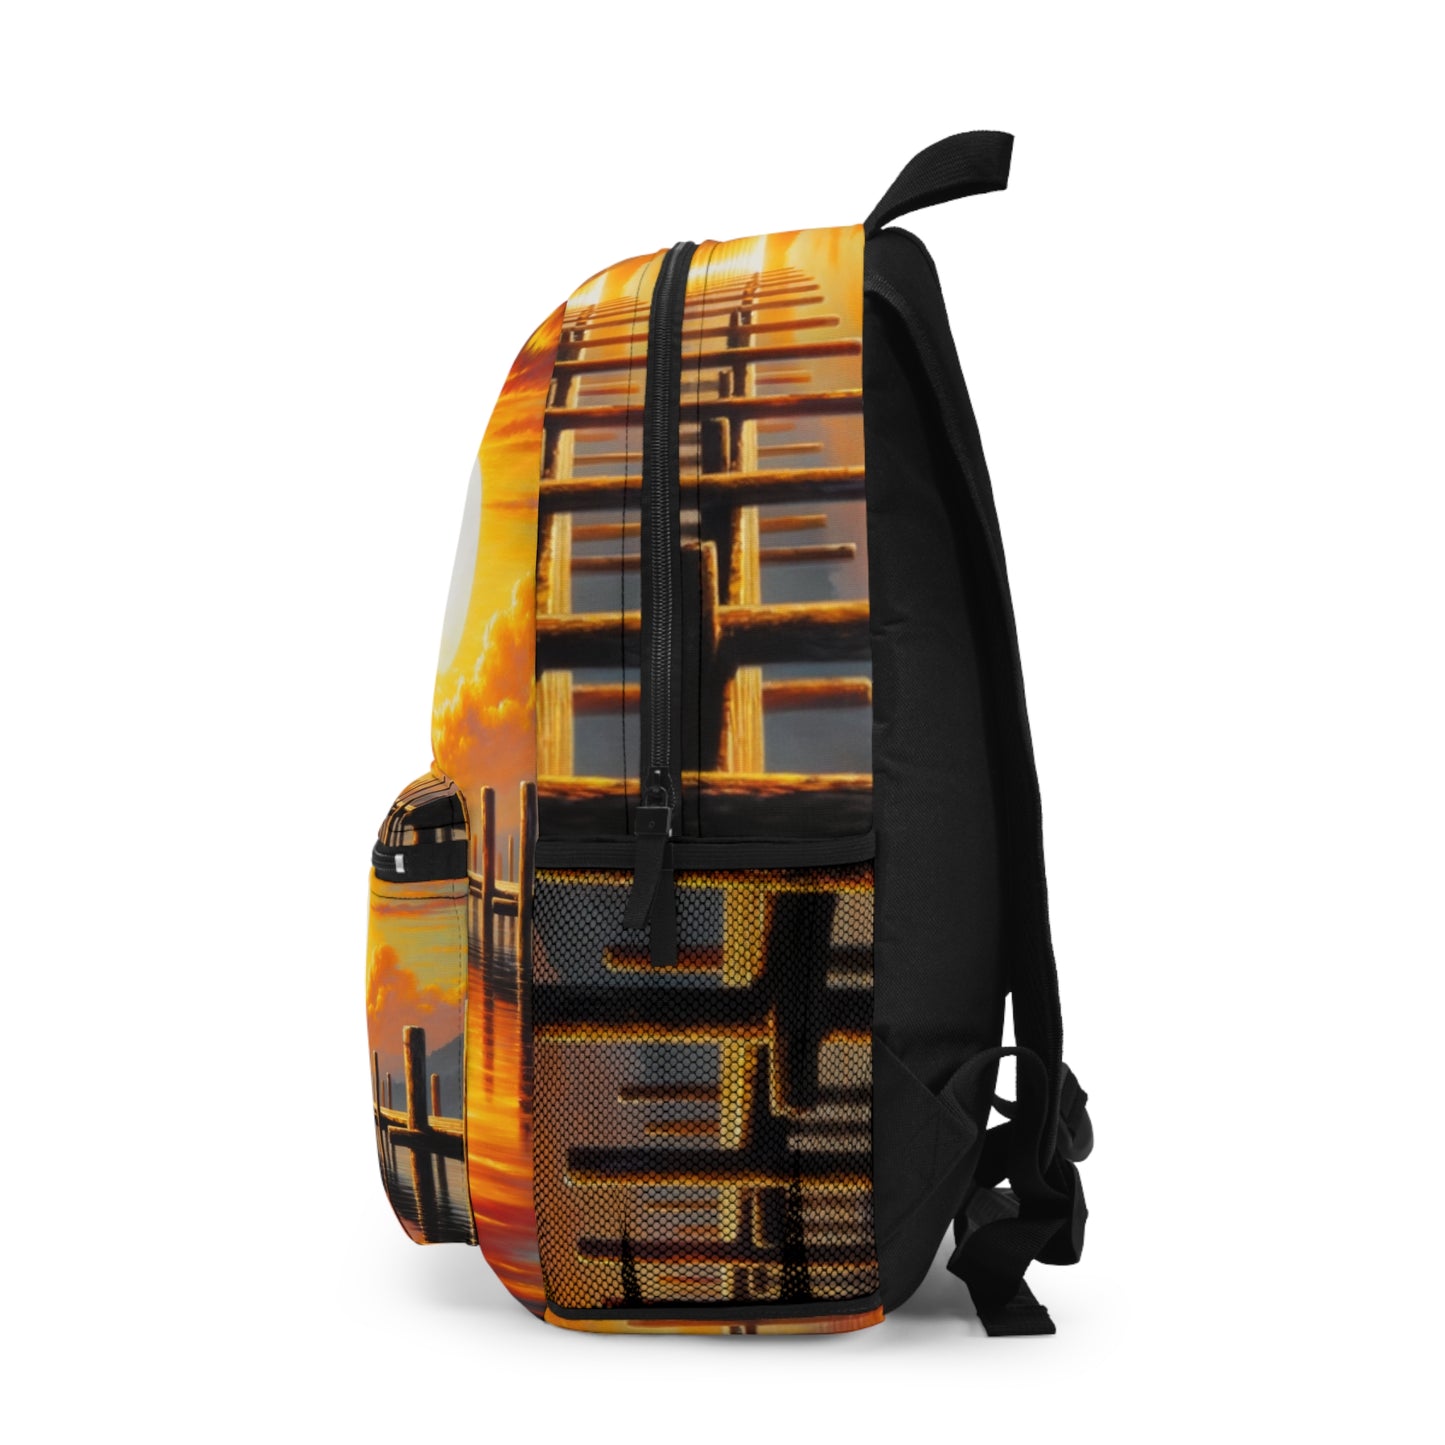 "Golden Reflections" - The Alien Backpack Impressionism Style